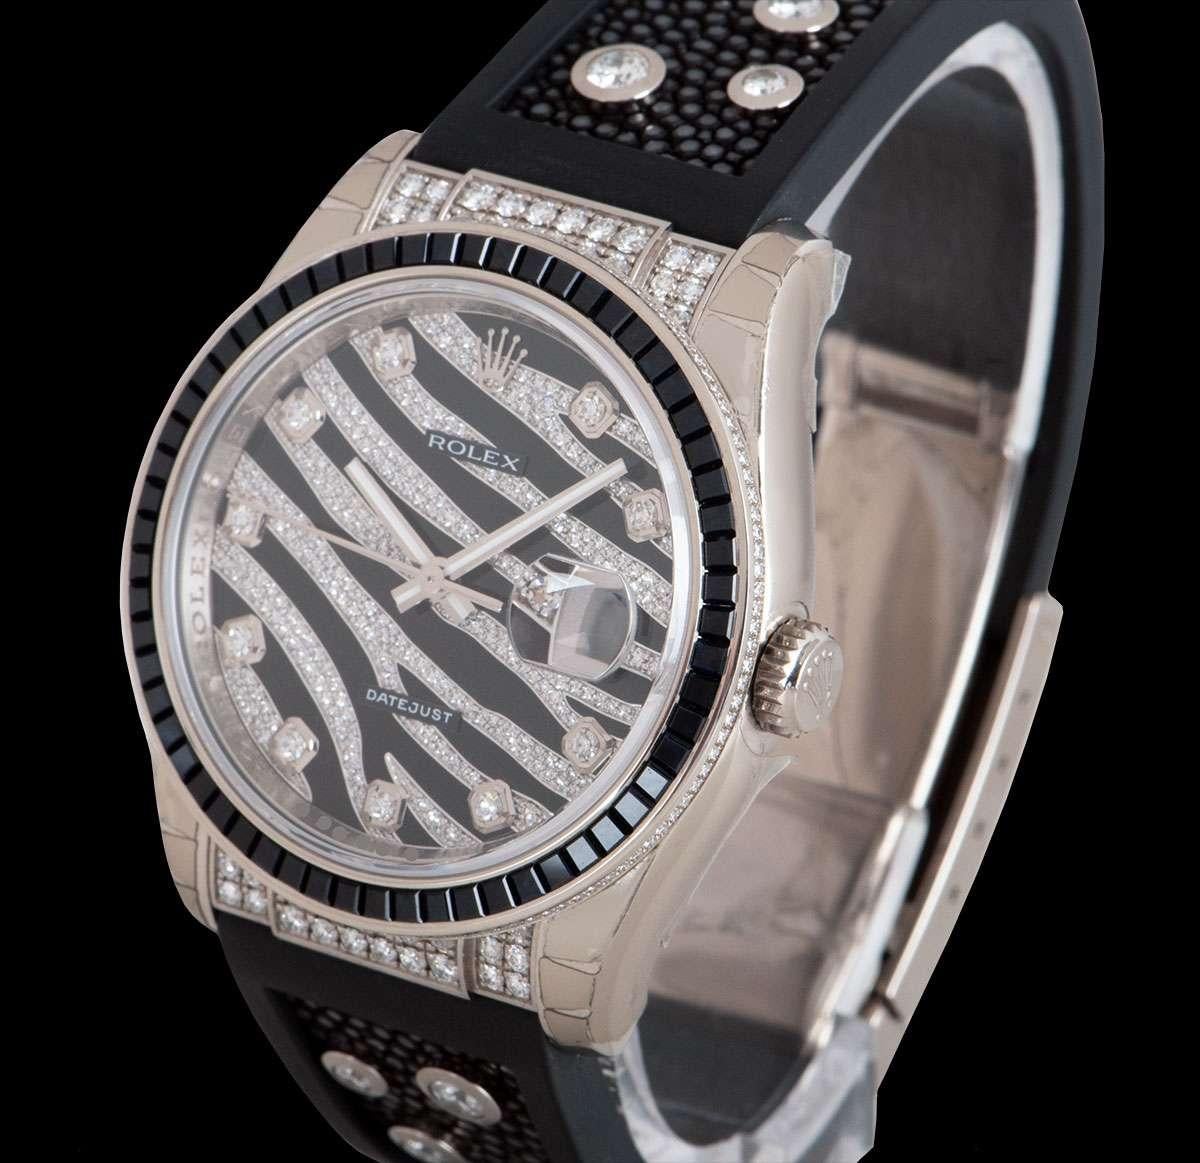 A 36 mm Unworn 18k White Gold Oyster Perpetual Datejust Gents NOS Wristwatch, black zebra striped pave diamond dial with 10 applied round brilliant diamond hour markers, date at 3 0'clock, a fixed 18k white gold bezel set with 60 square cut black